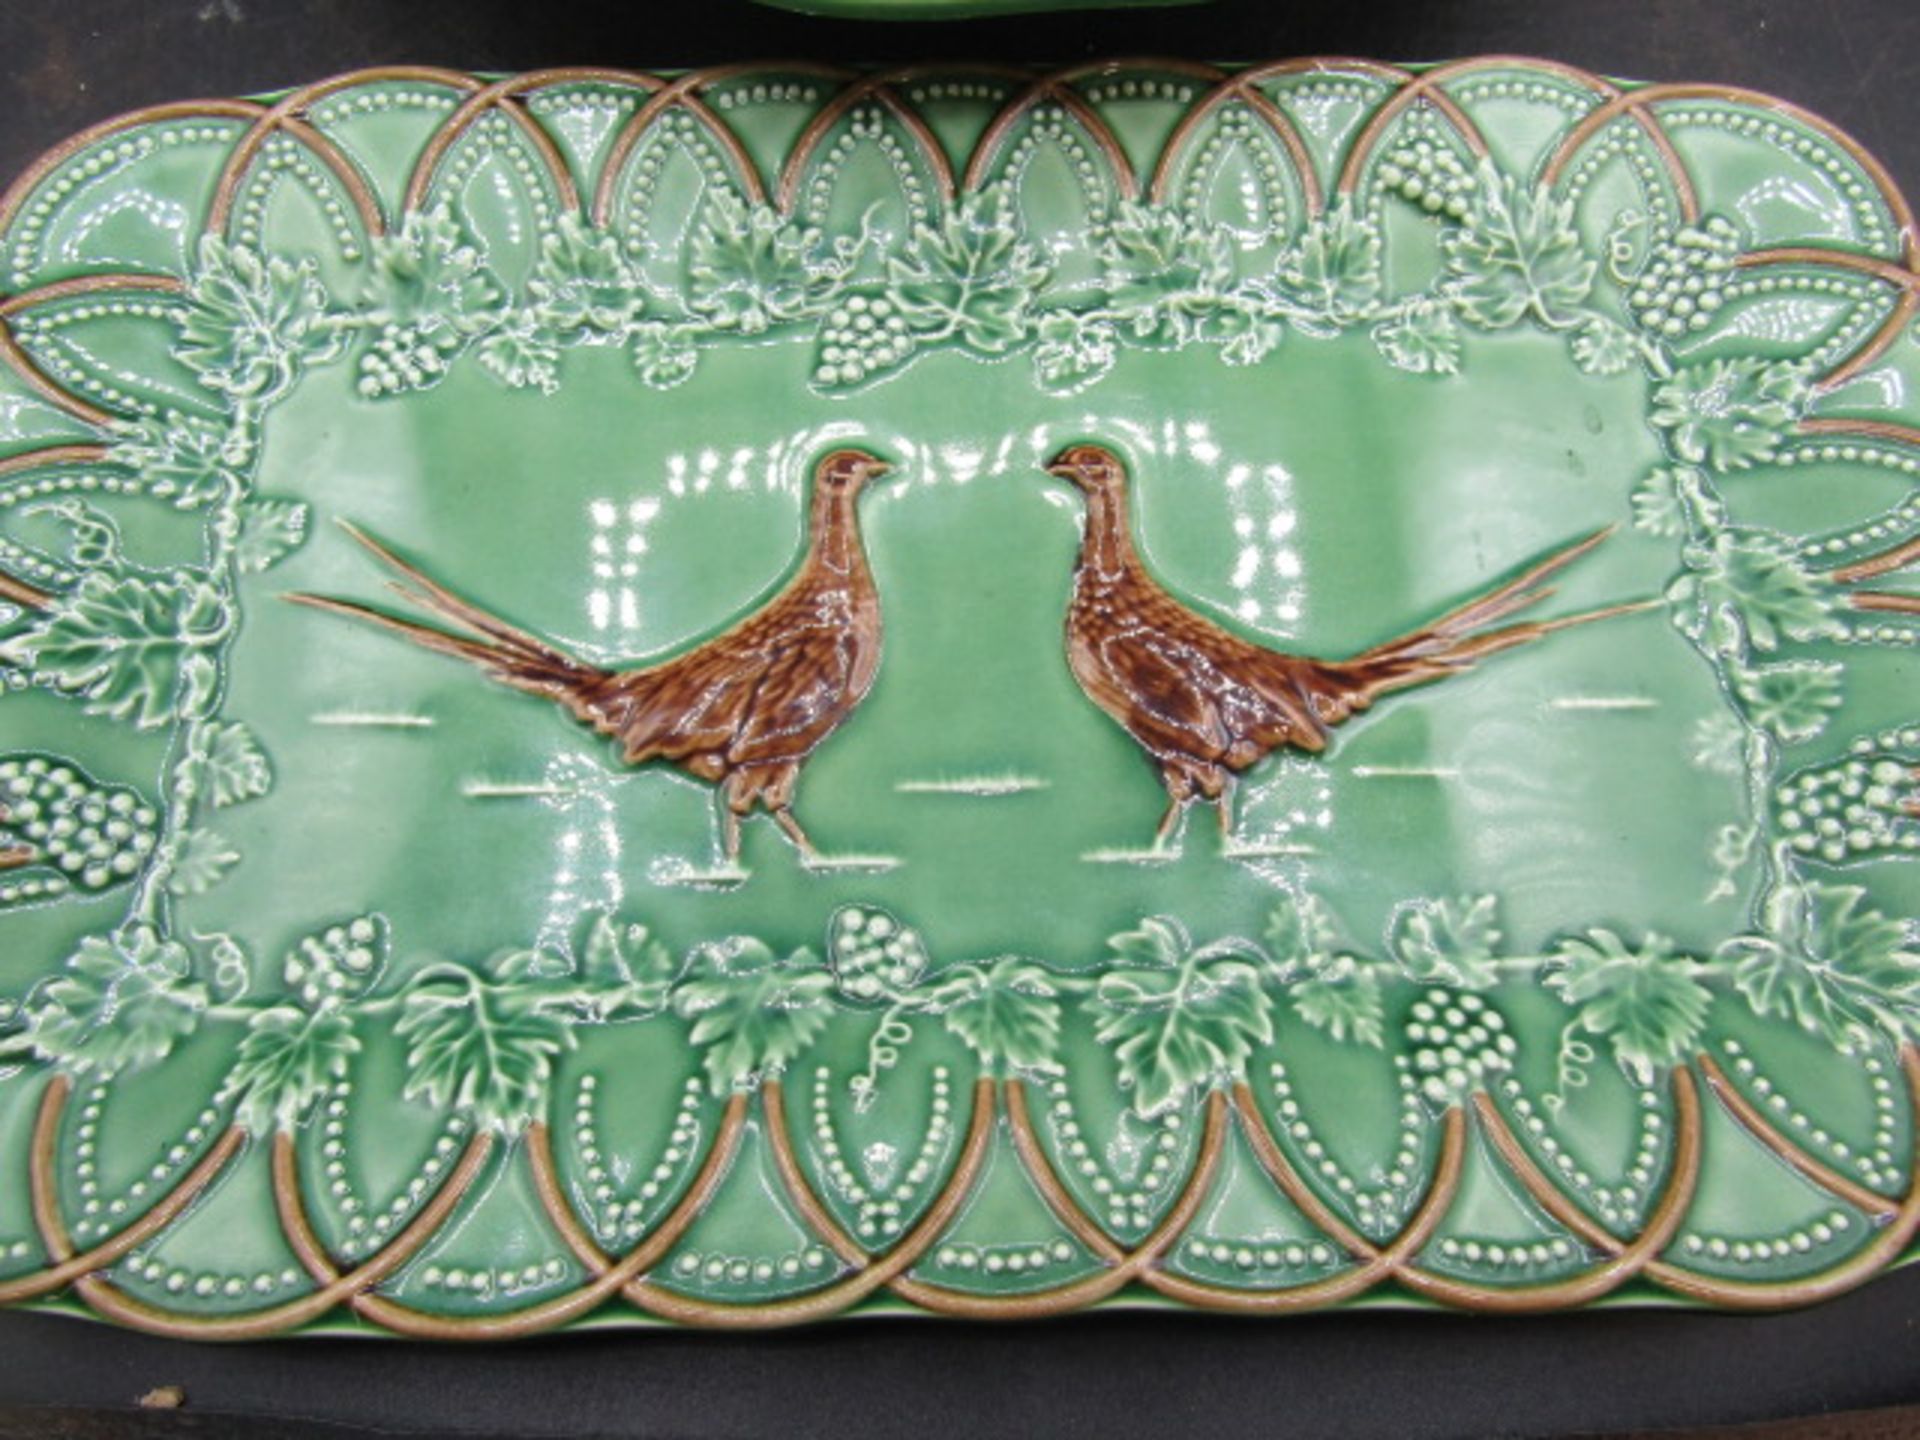 Portuguese pheasant platter and bowl decorated with vines along with 2 glass dishes - Image 3 of 5